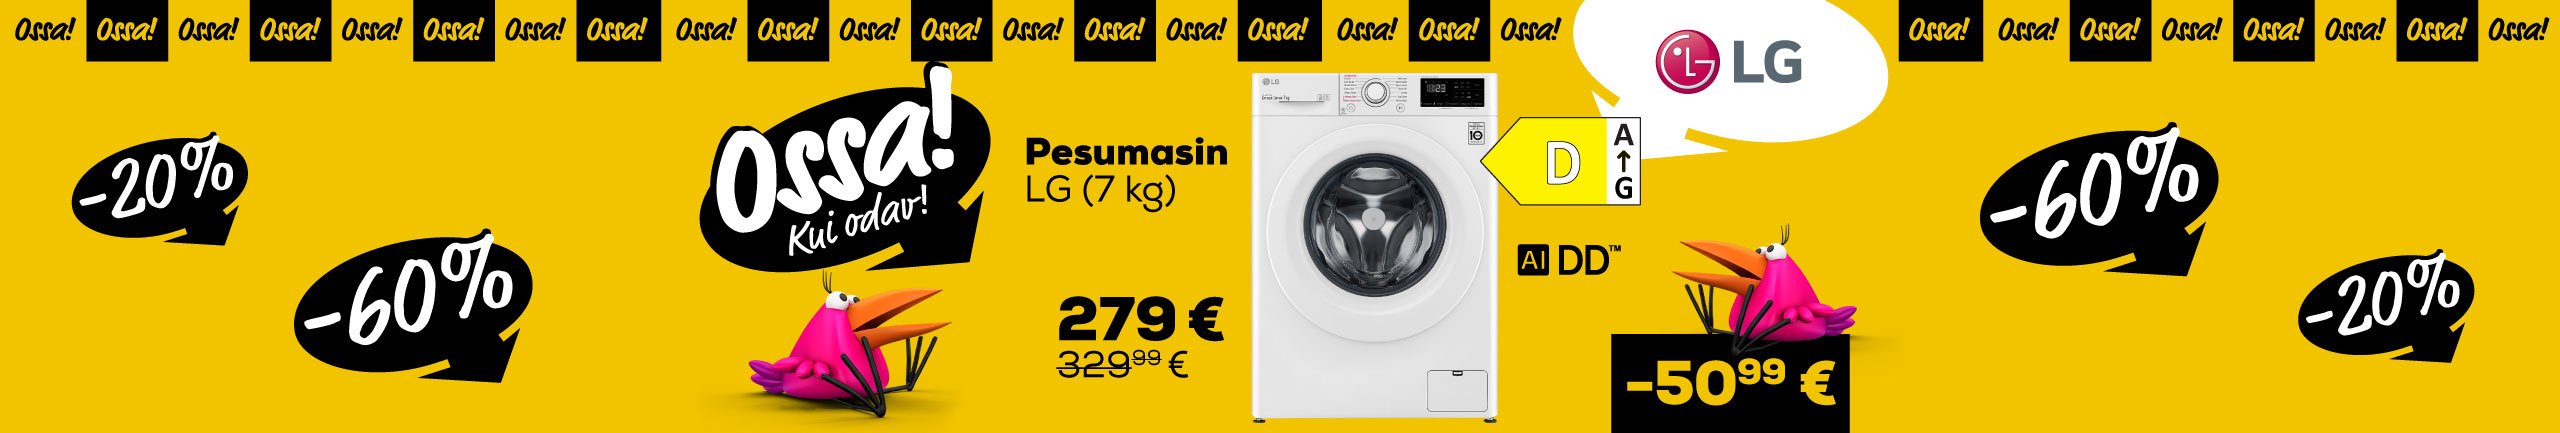 FPS Ossa extended! We added new products! Washing machine LG (7 kg) 